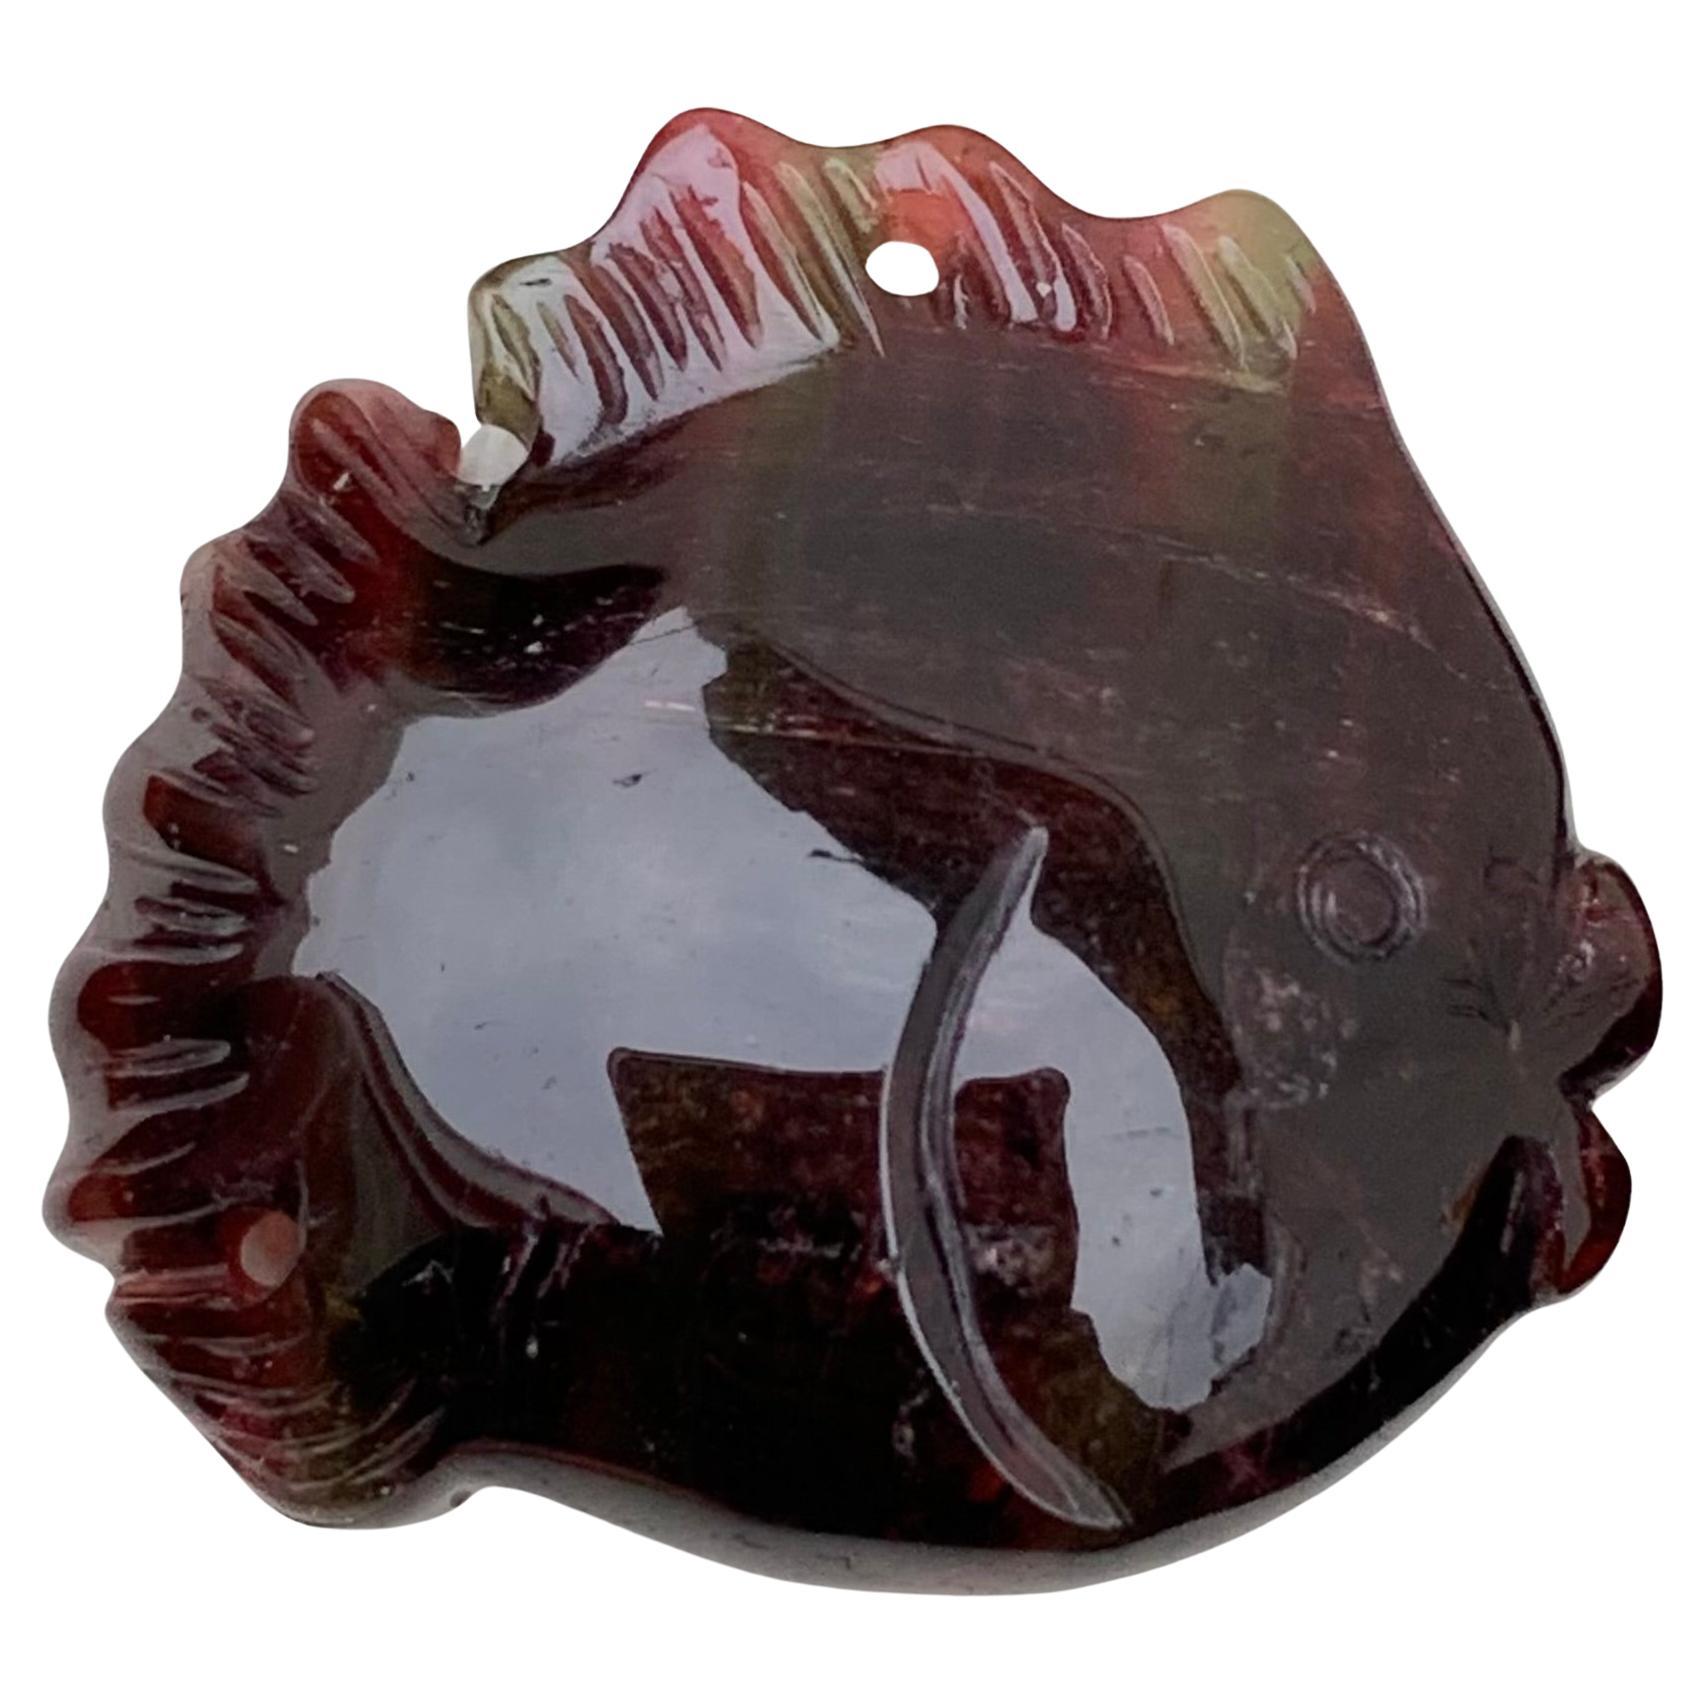 37.10 Carat Amazing Fish Shape Tri Colour Tourmaline Drilled Carving From Africa For Sale